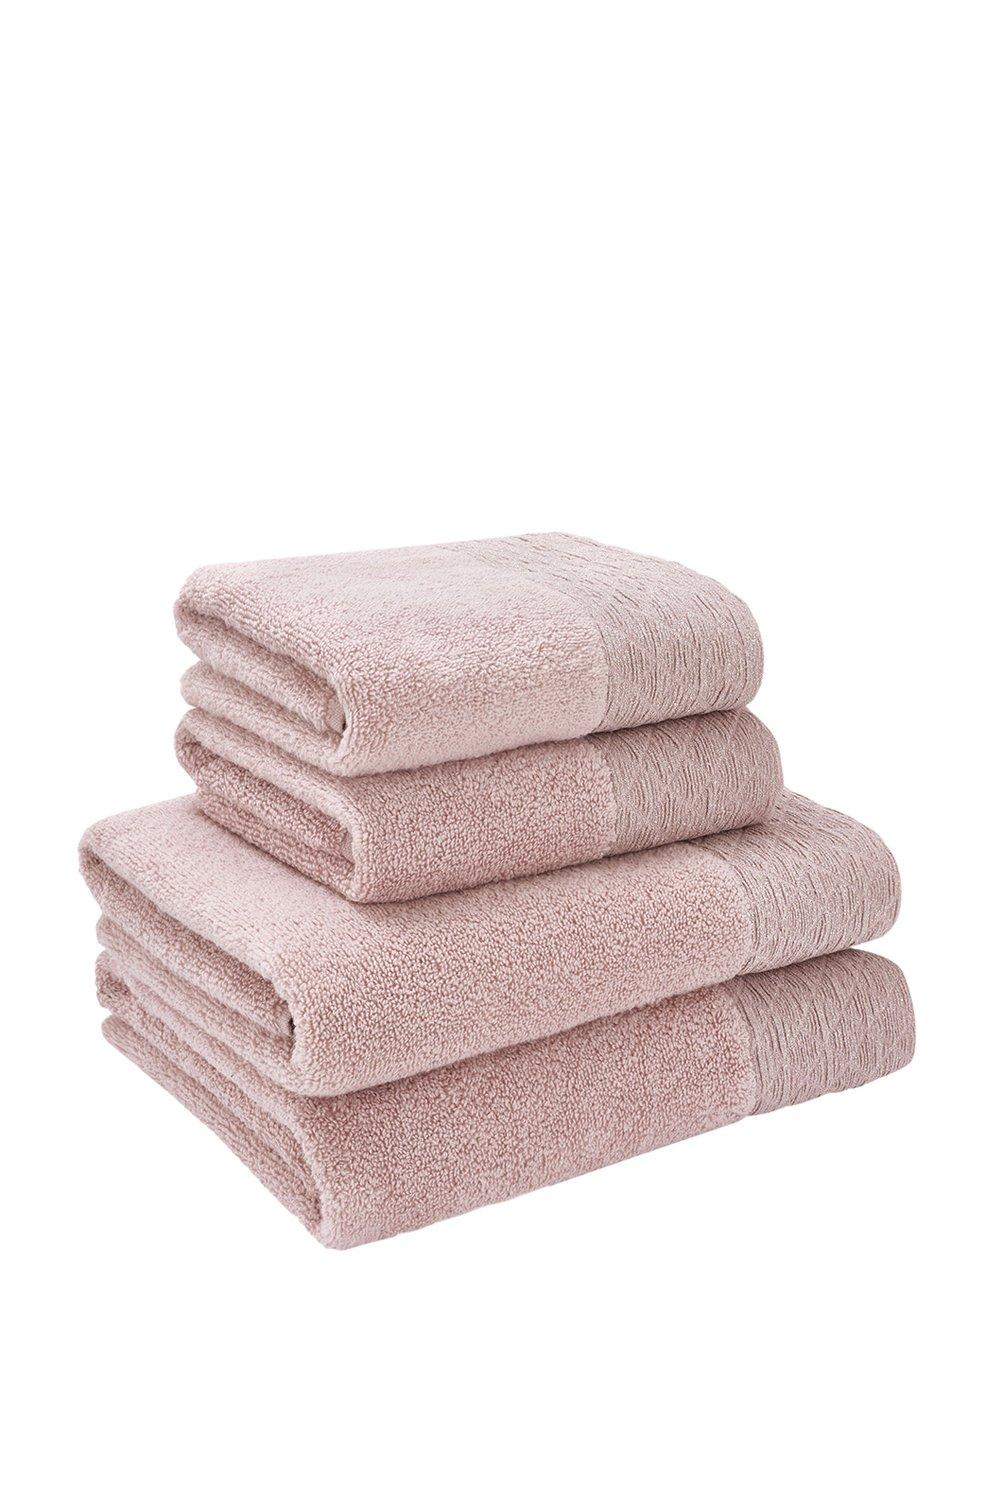 Picture of Sparkle Towel Bale